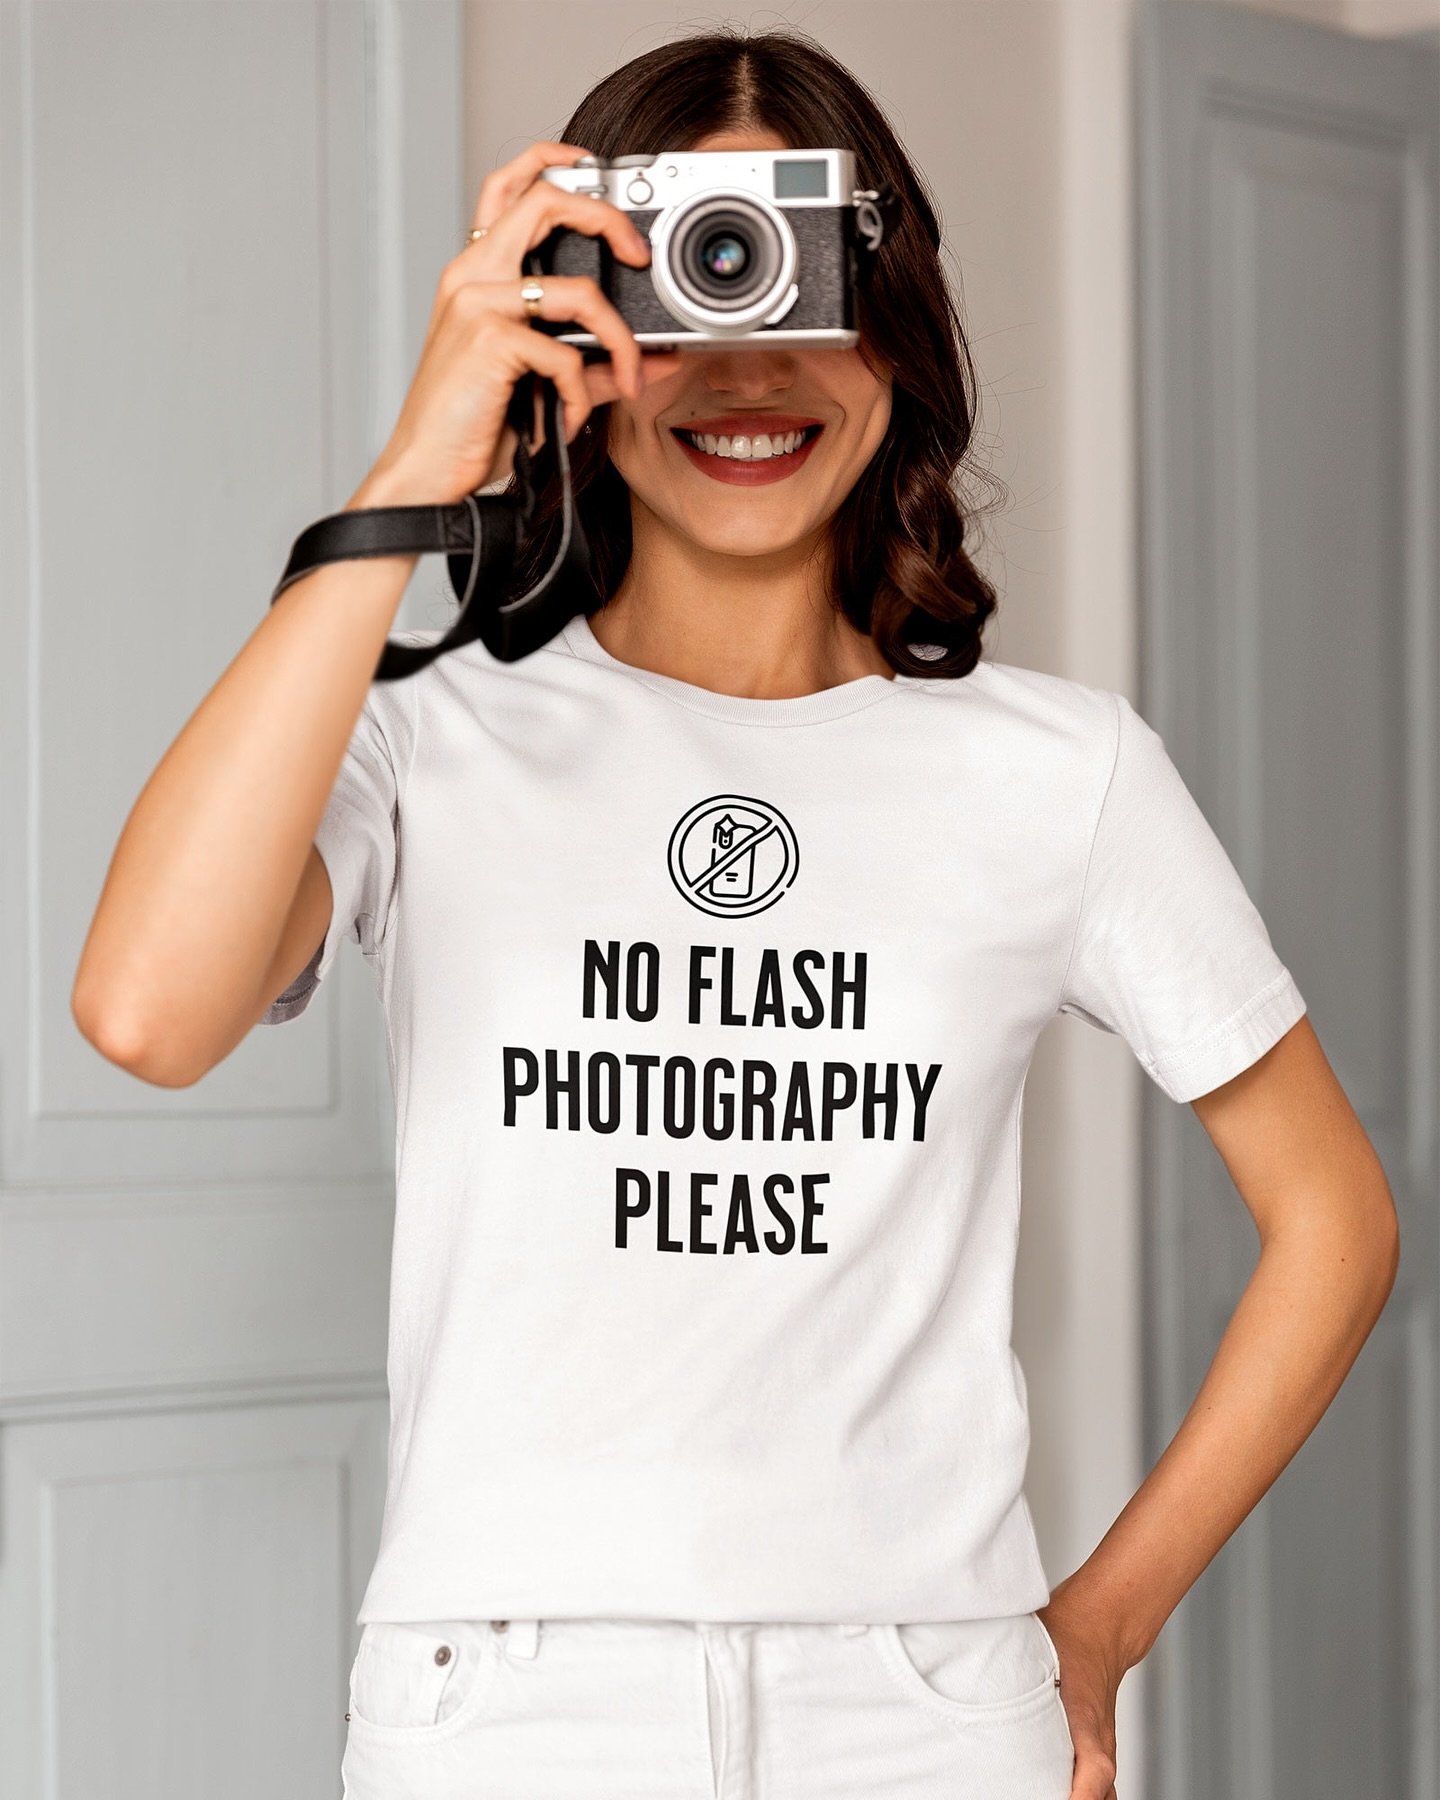 Step into the magic with our No Flash Photography Please t-shirt, inspired by the iconic message often heard in Disney Parks rides and attractions.

White Shirt
https://www.1923mainstreet.com/shop/p/no-flash-photography-t-shirt

Black Shirt
https://w